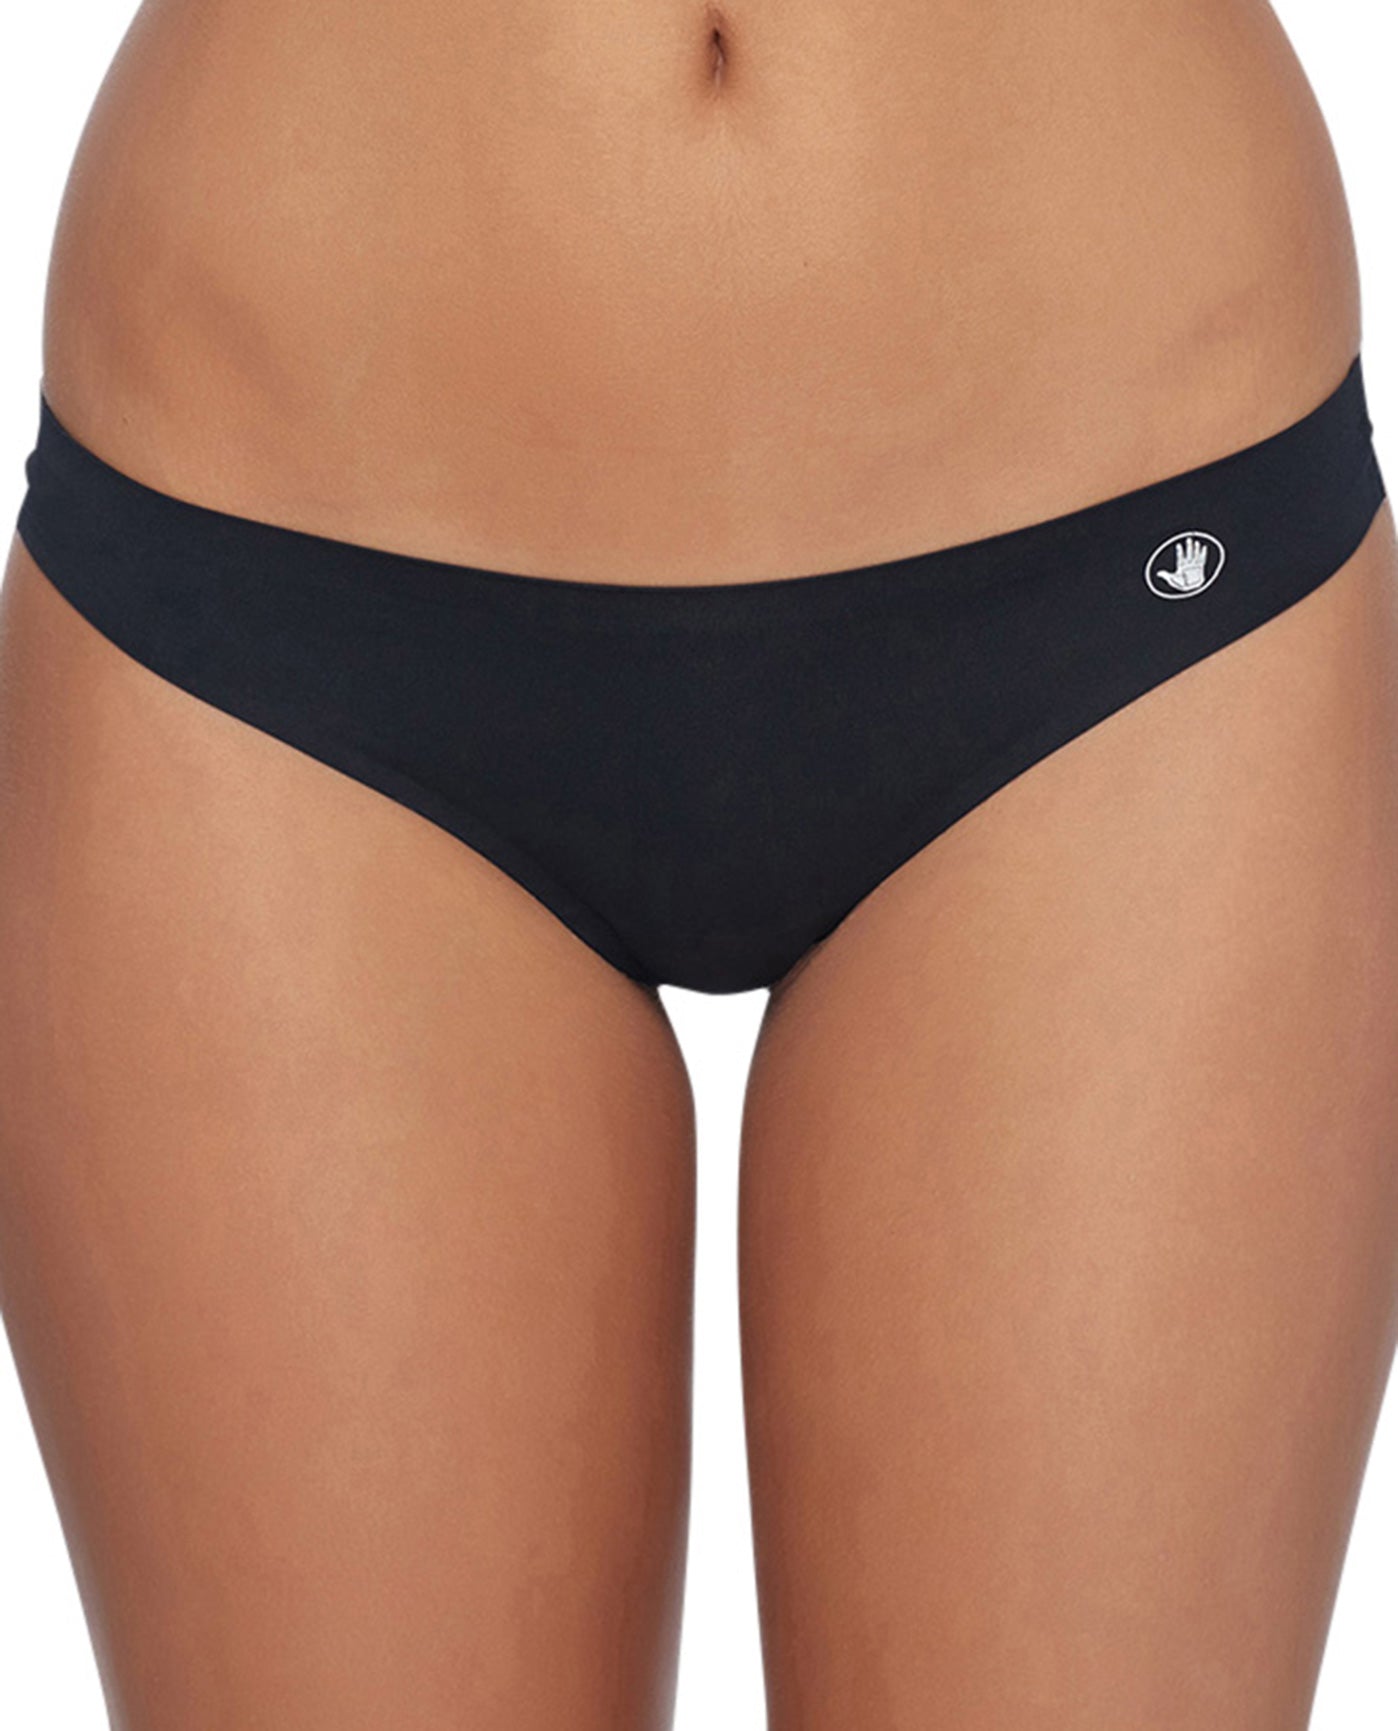 Front View Of Body Glove Sport Seamless Thong Panty | BGS Black